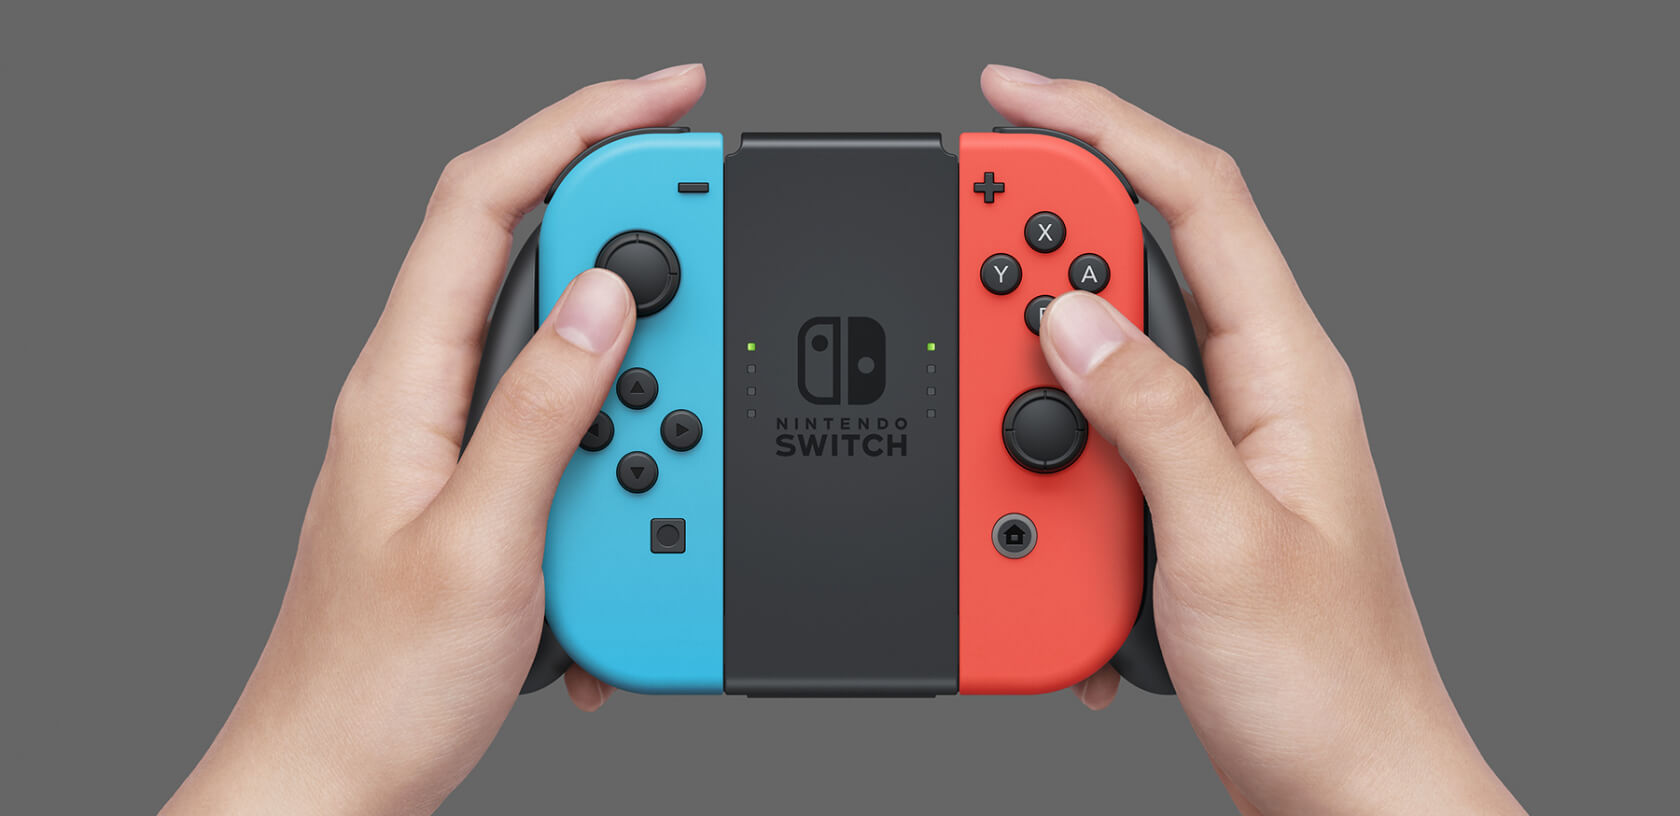 Engineer designs simple JoyCon adapter for one-handed friend